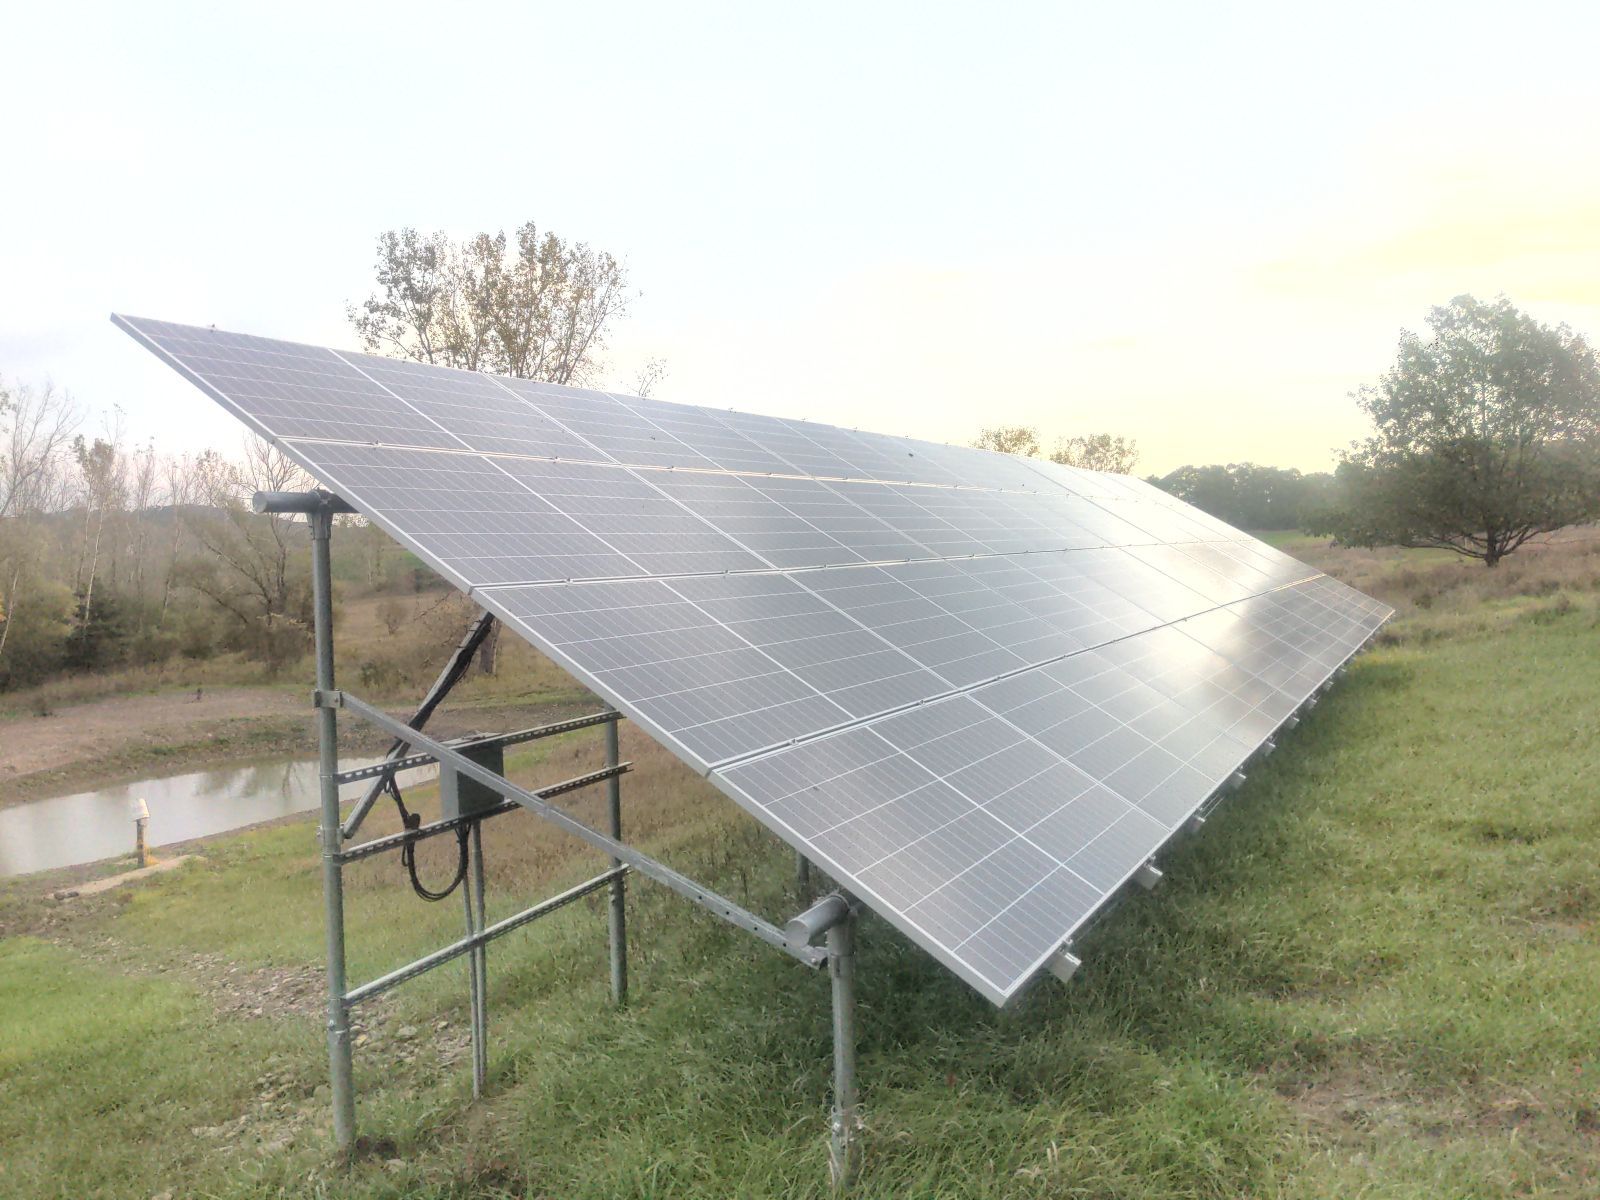 An image of a ground mounted solar array